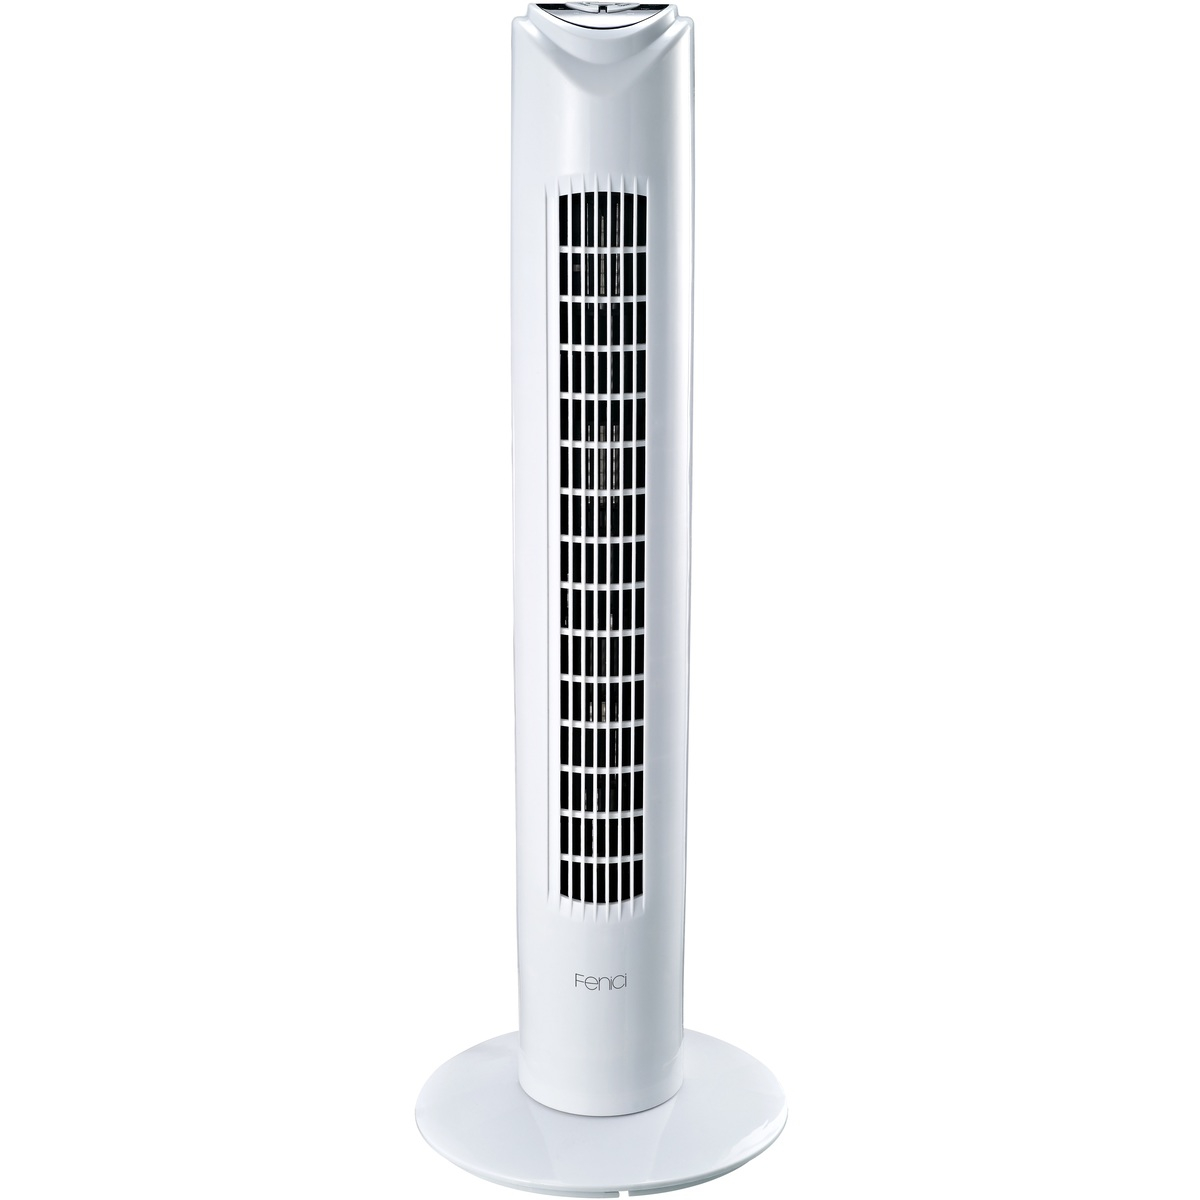 Fenici 80cm Tower Fan With Remote Control White Fyf29rb inside sizing 1200 X 1200